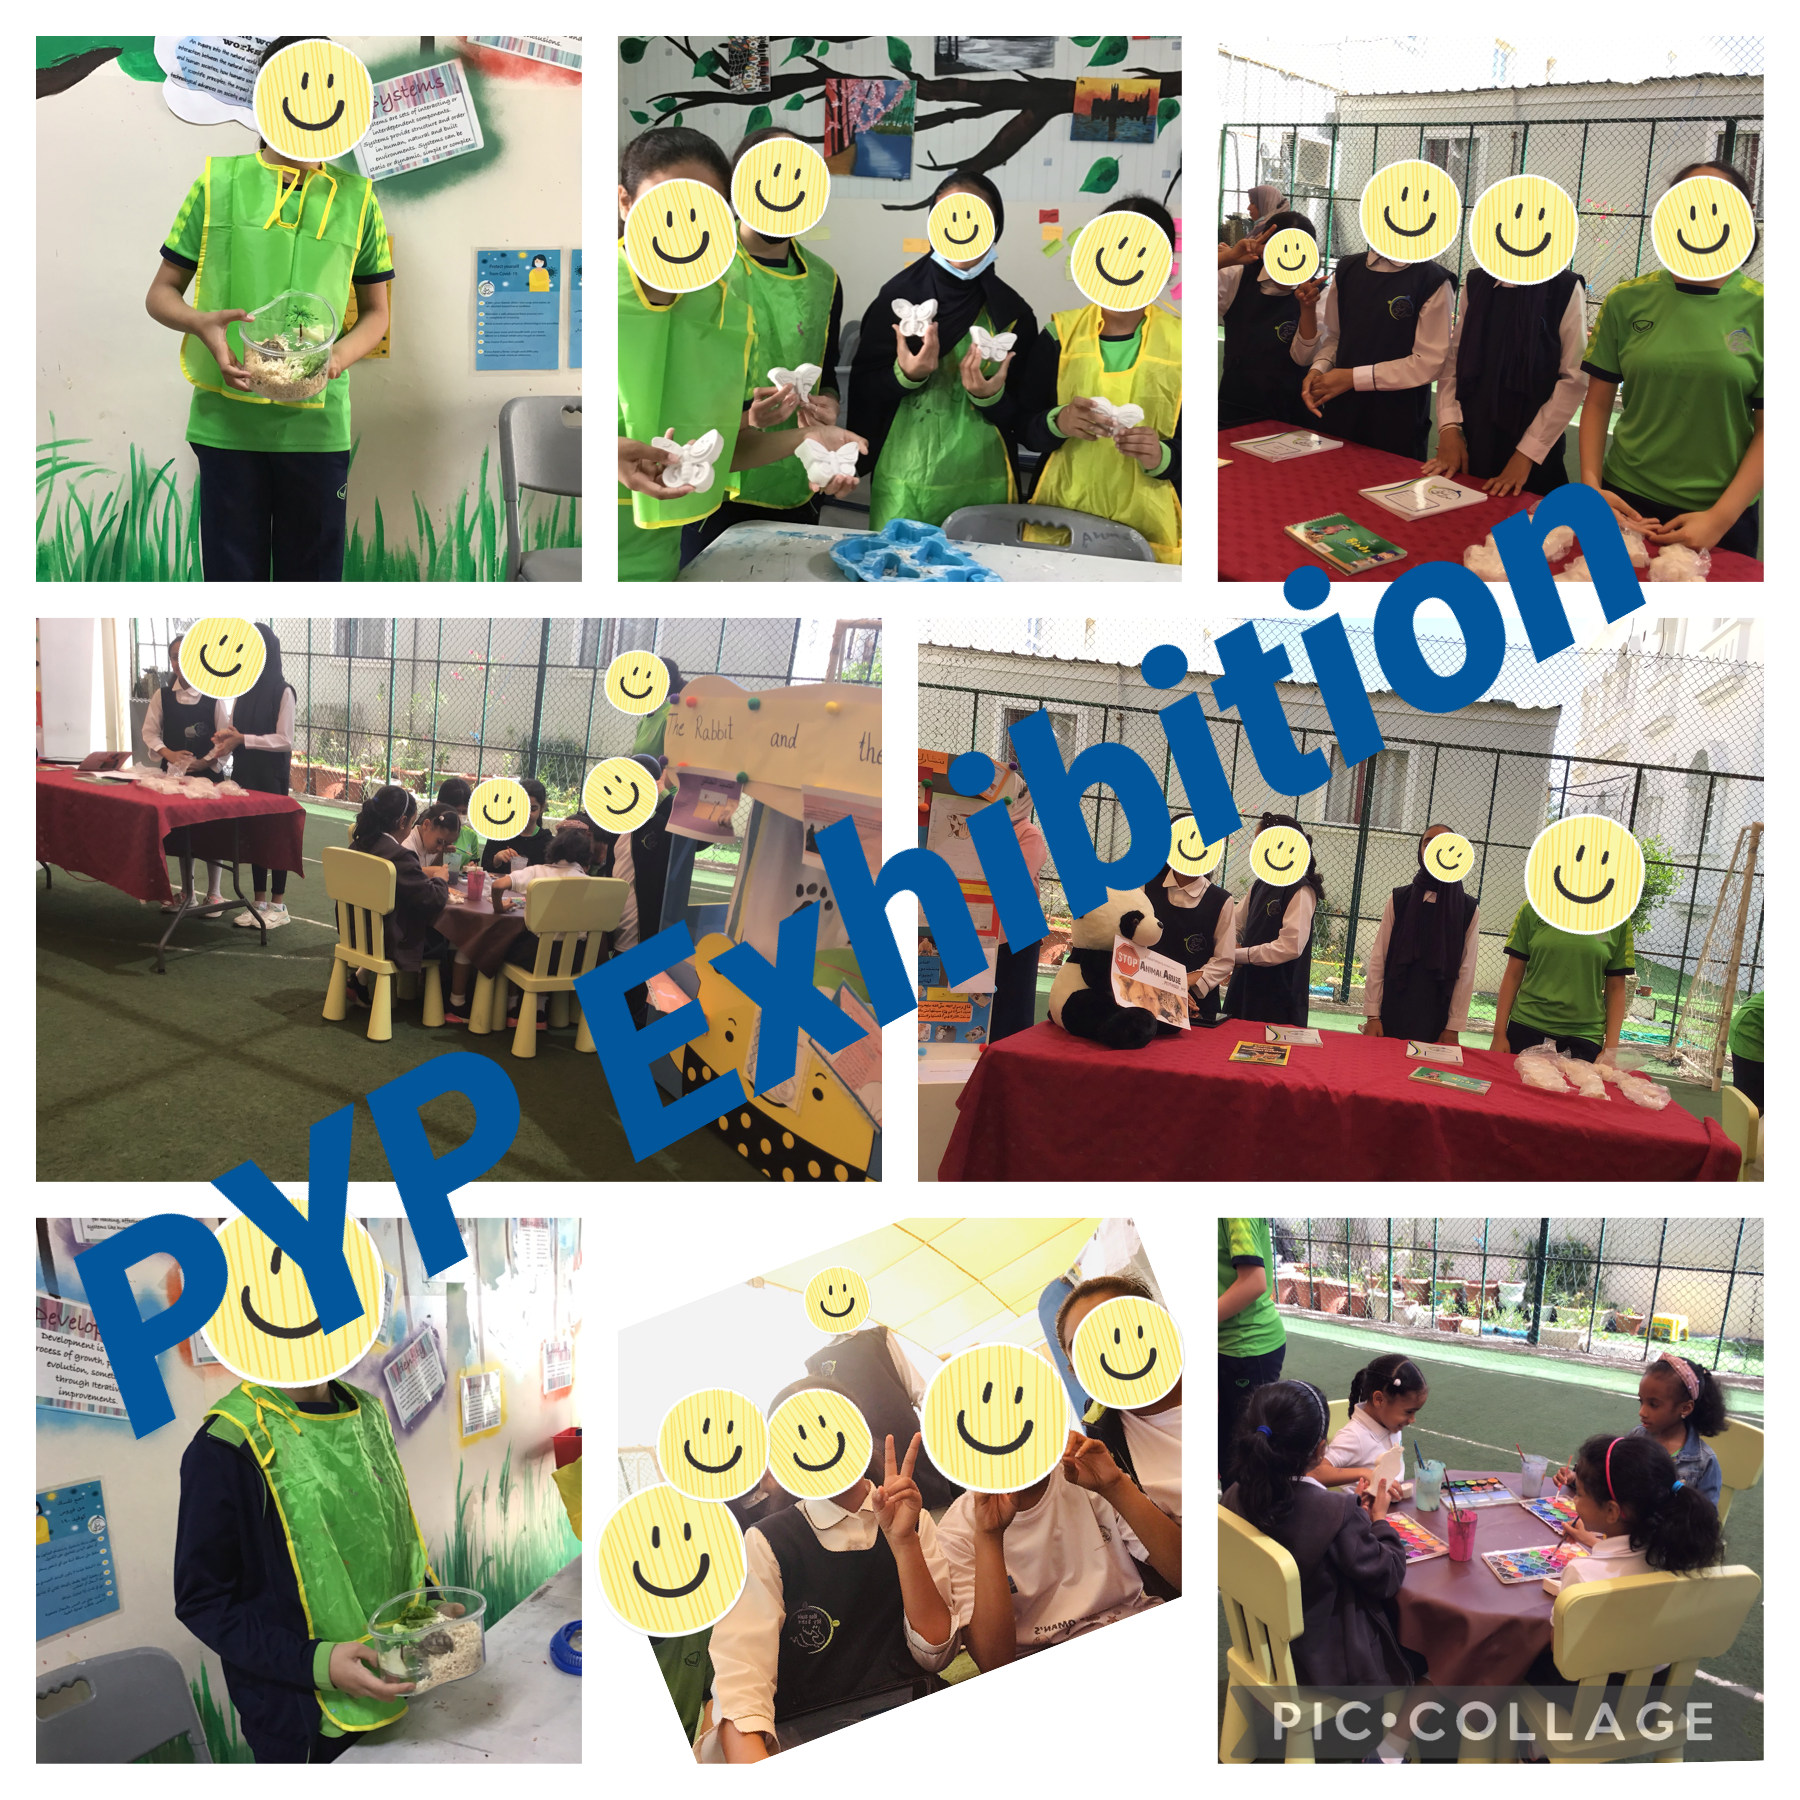 Pyp exhibition it was so fun but scary at the same time